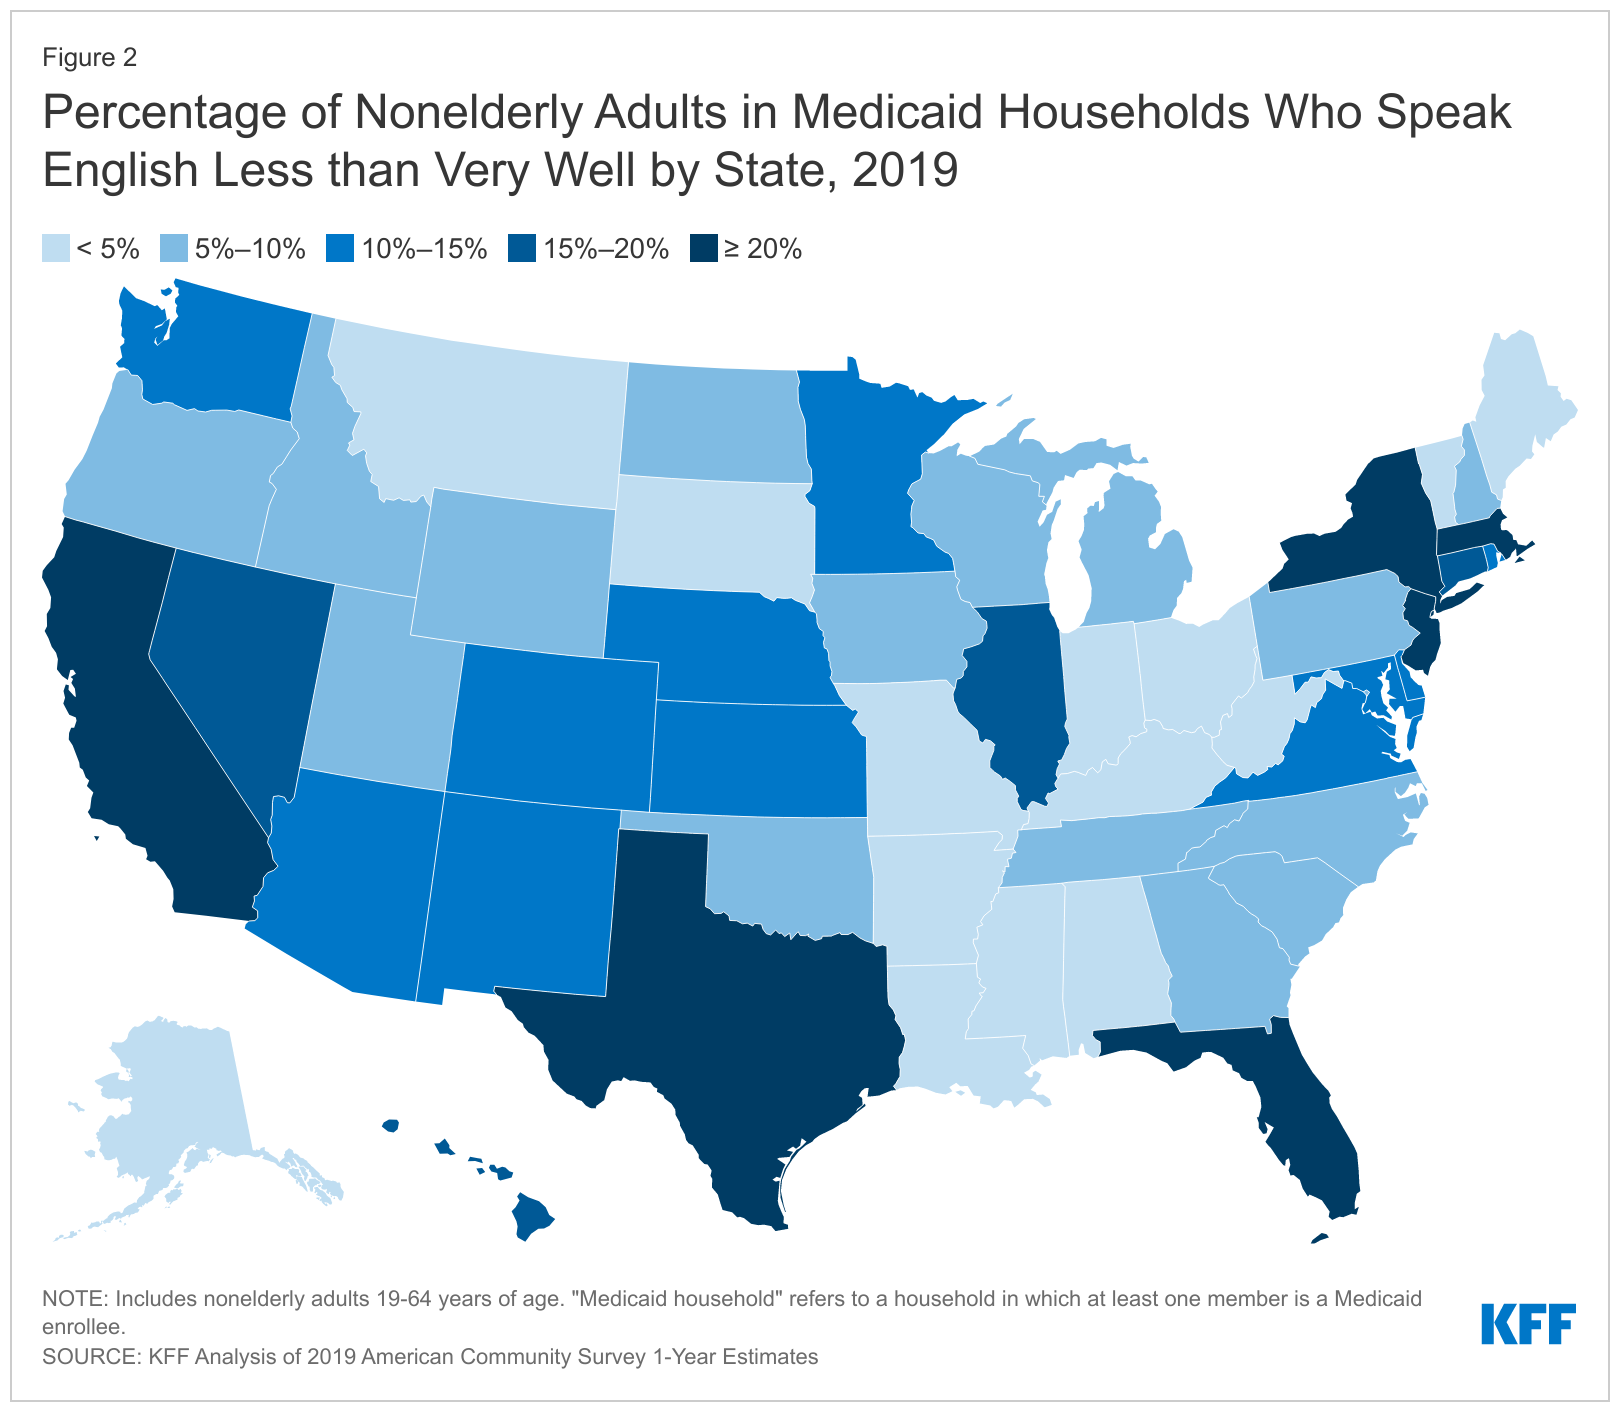 https://www.kff.org/wp-content/uploads/2022/03/Figure-2-percentage-of-nonelderly-adults-in-medicaid-households-who-speak-english-less-than-very-well-by-state-2019.png